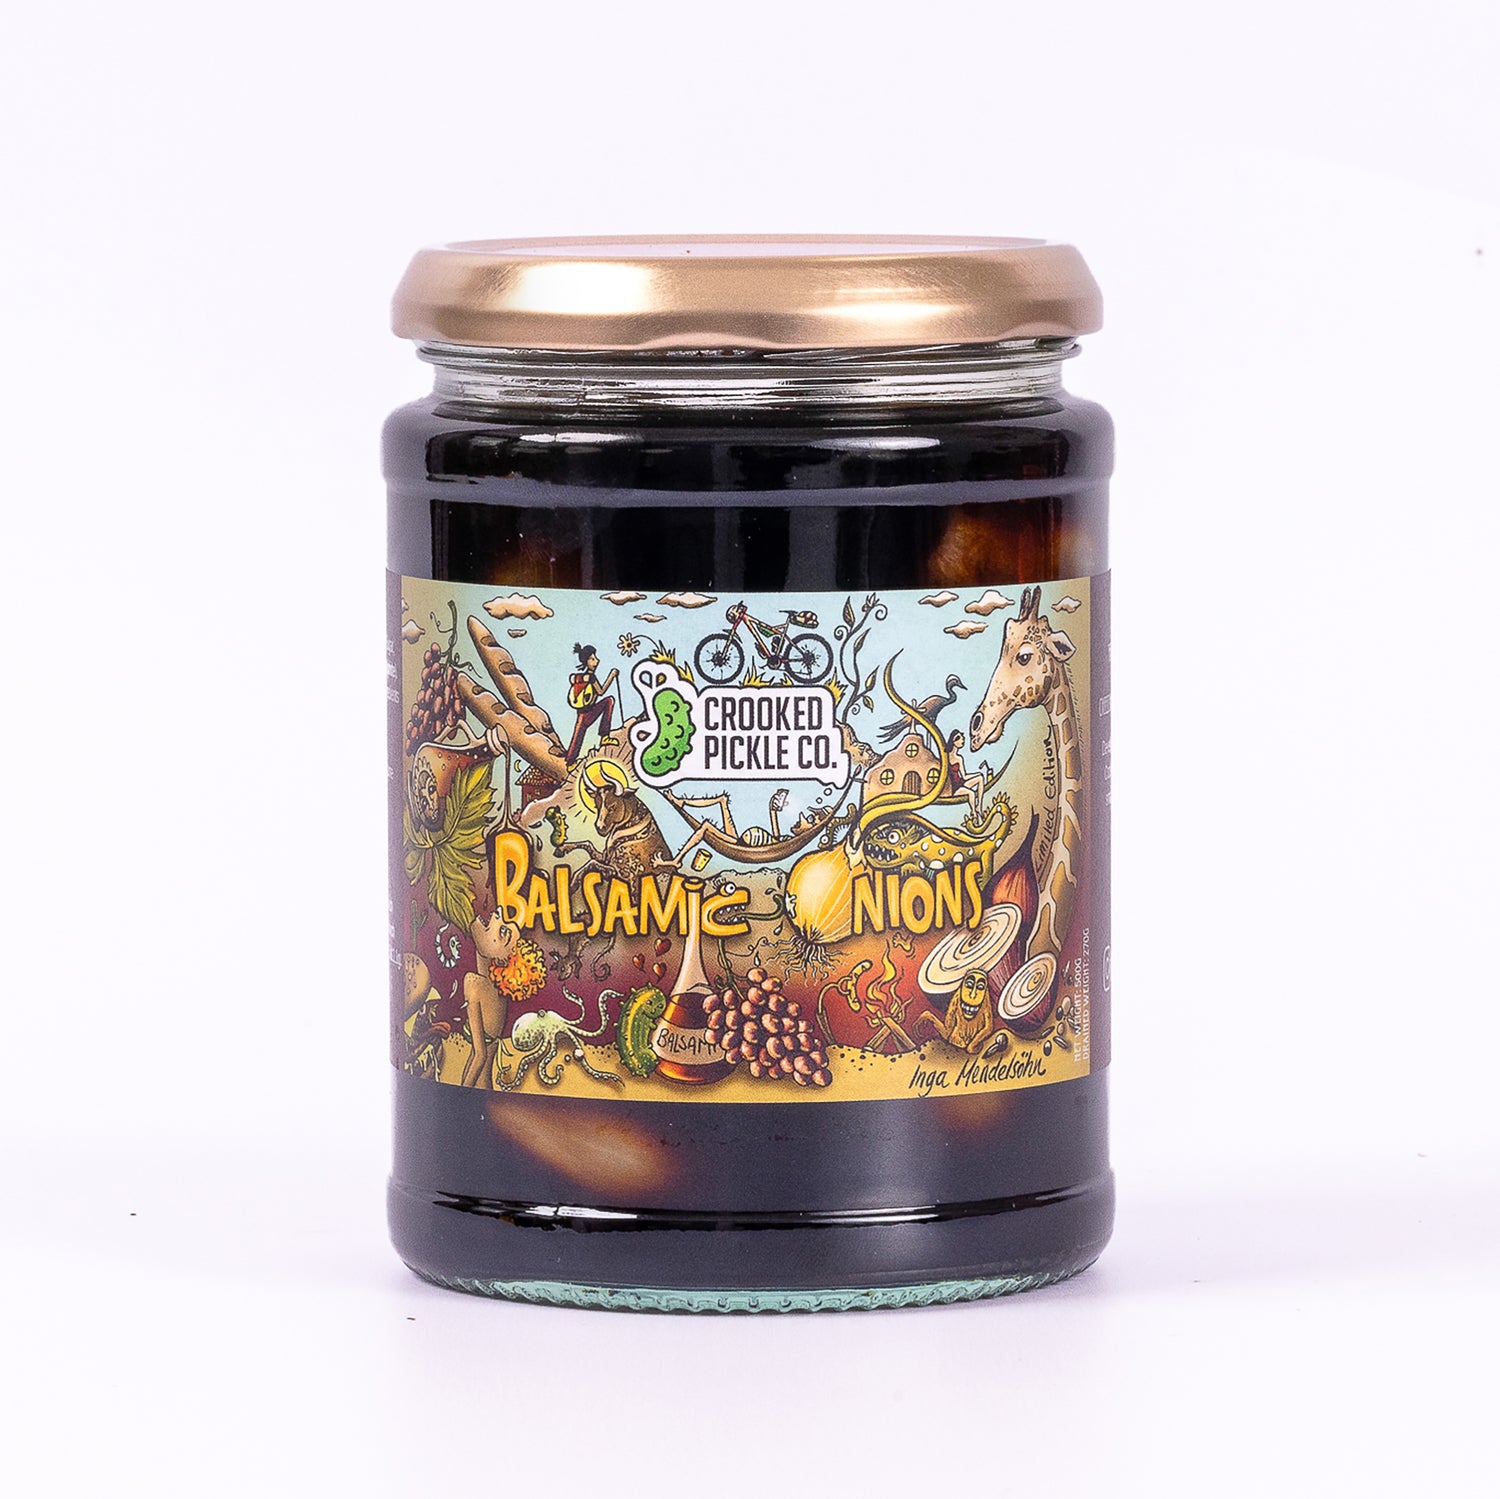 Balsamic Onions - Limited Edition